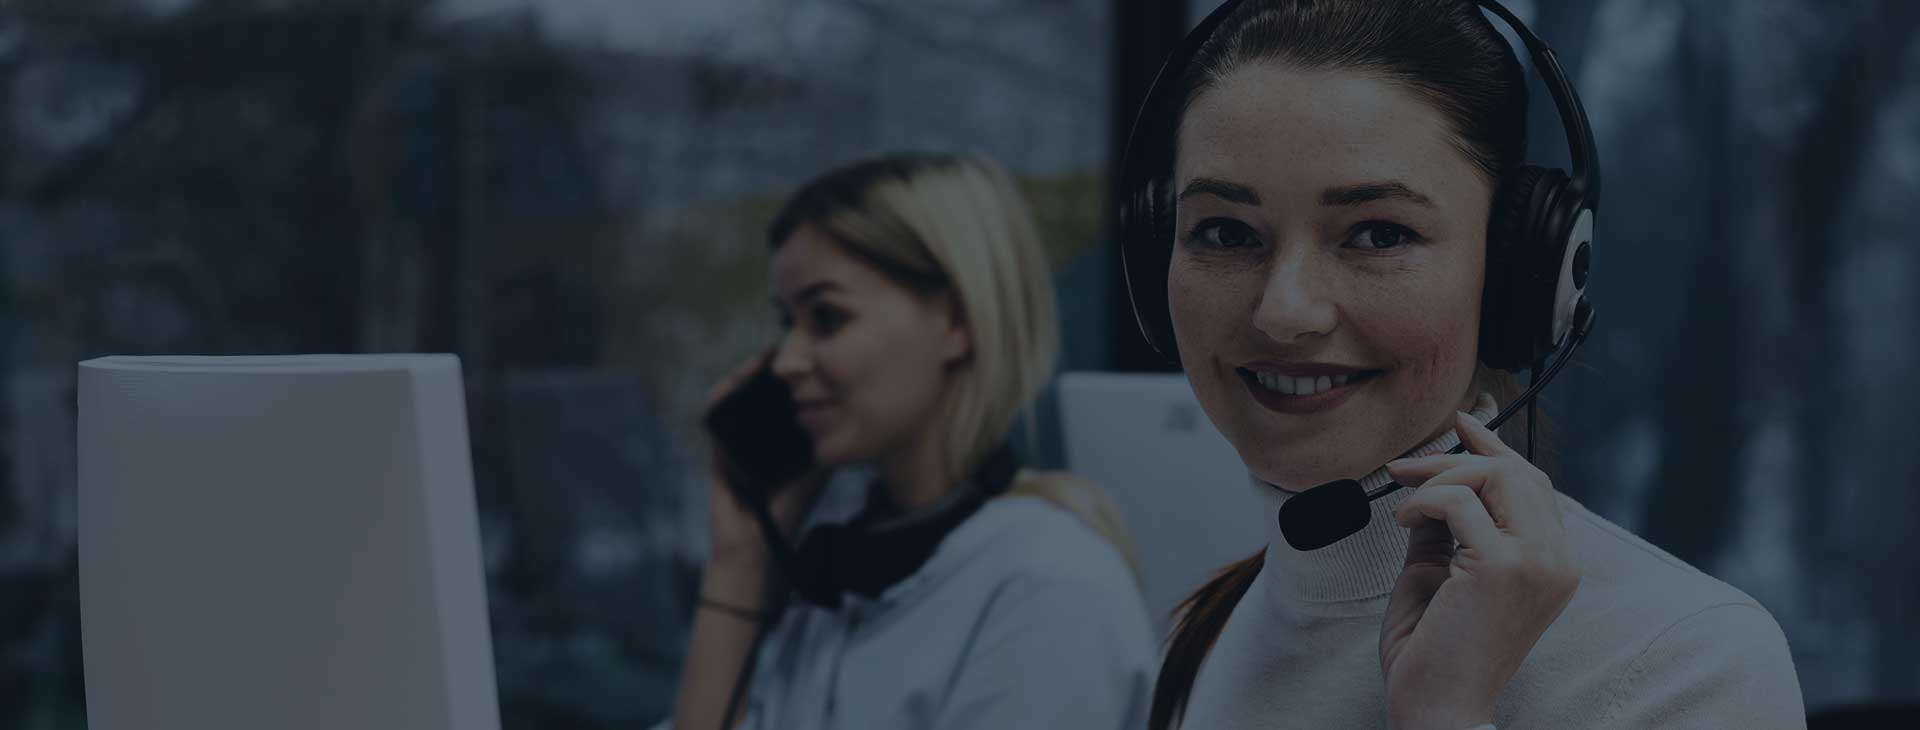 banner image of woman with headset looking and smiling